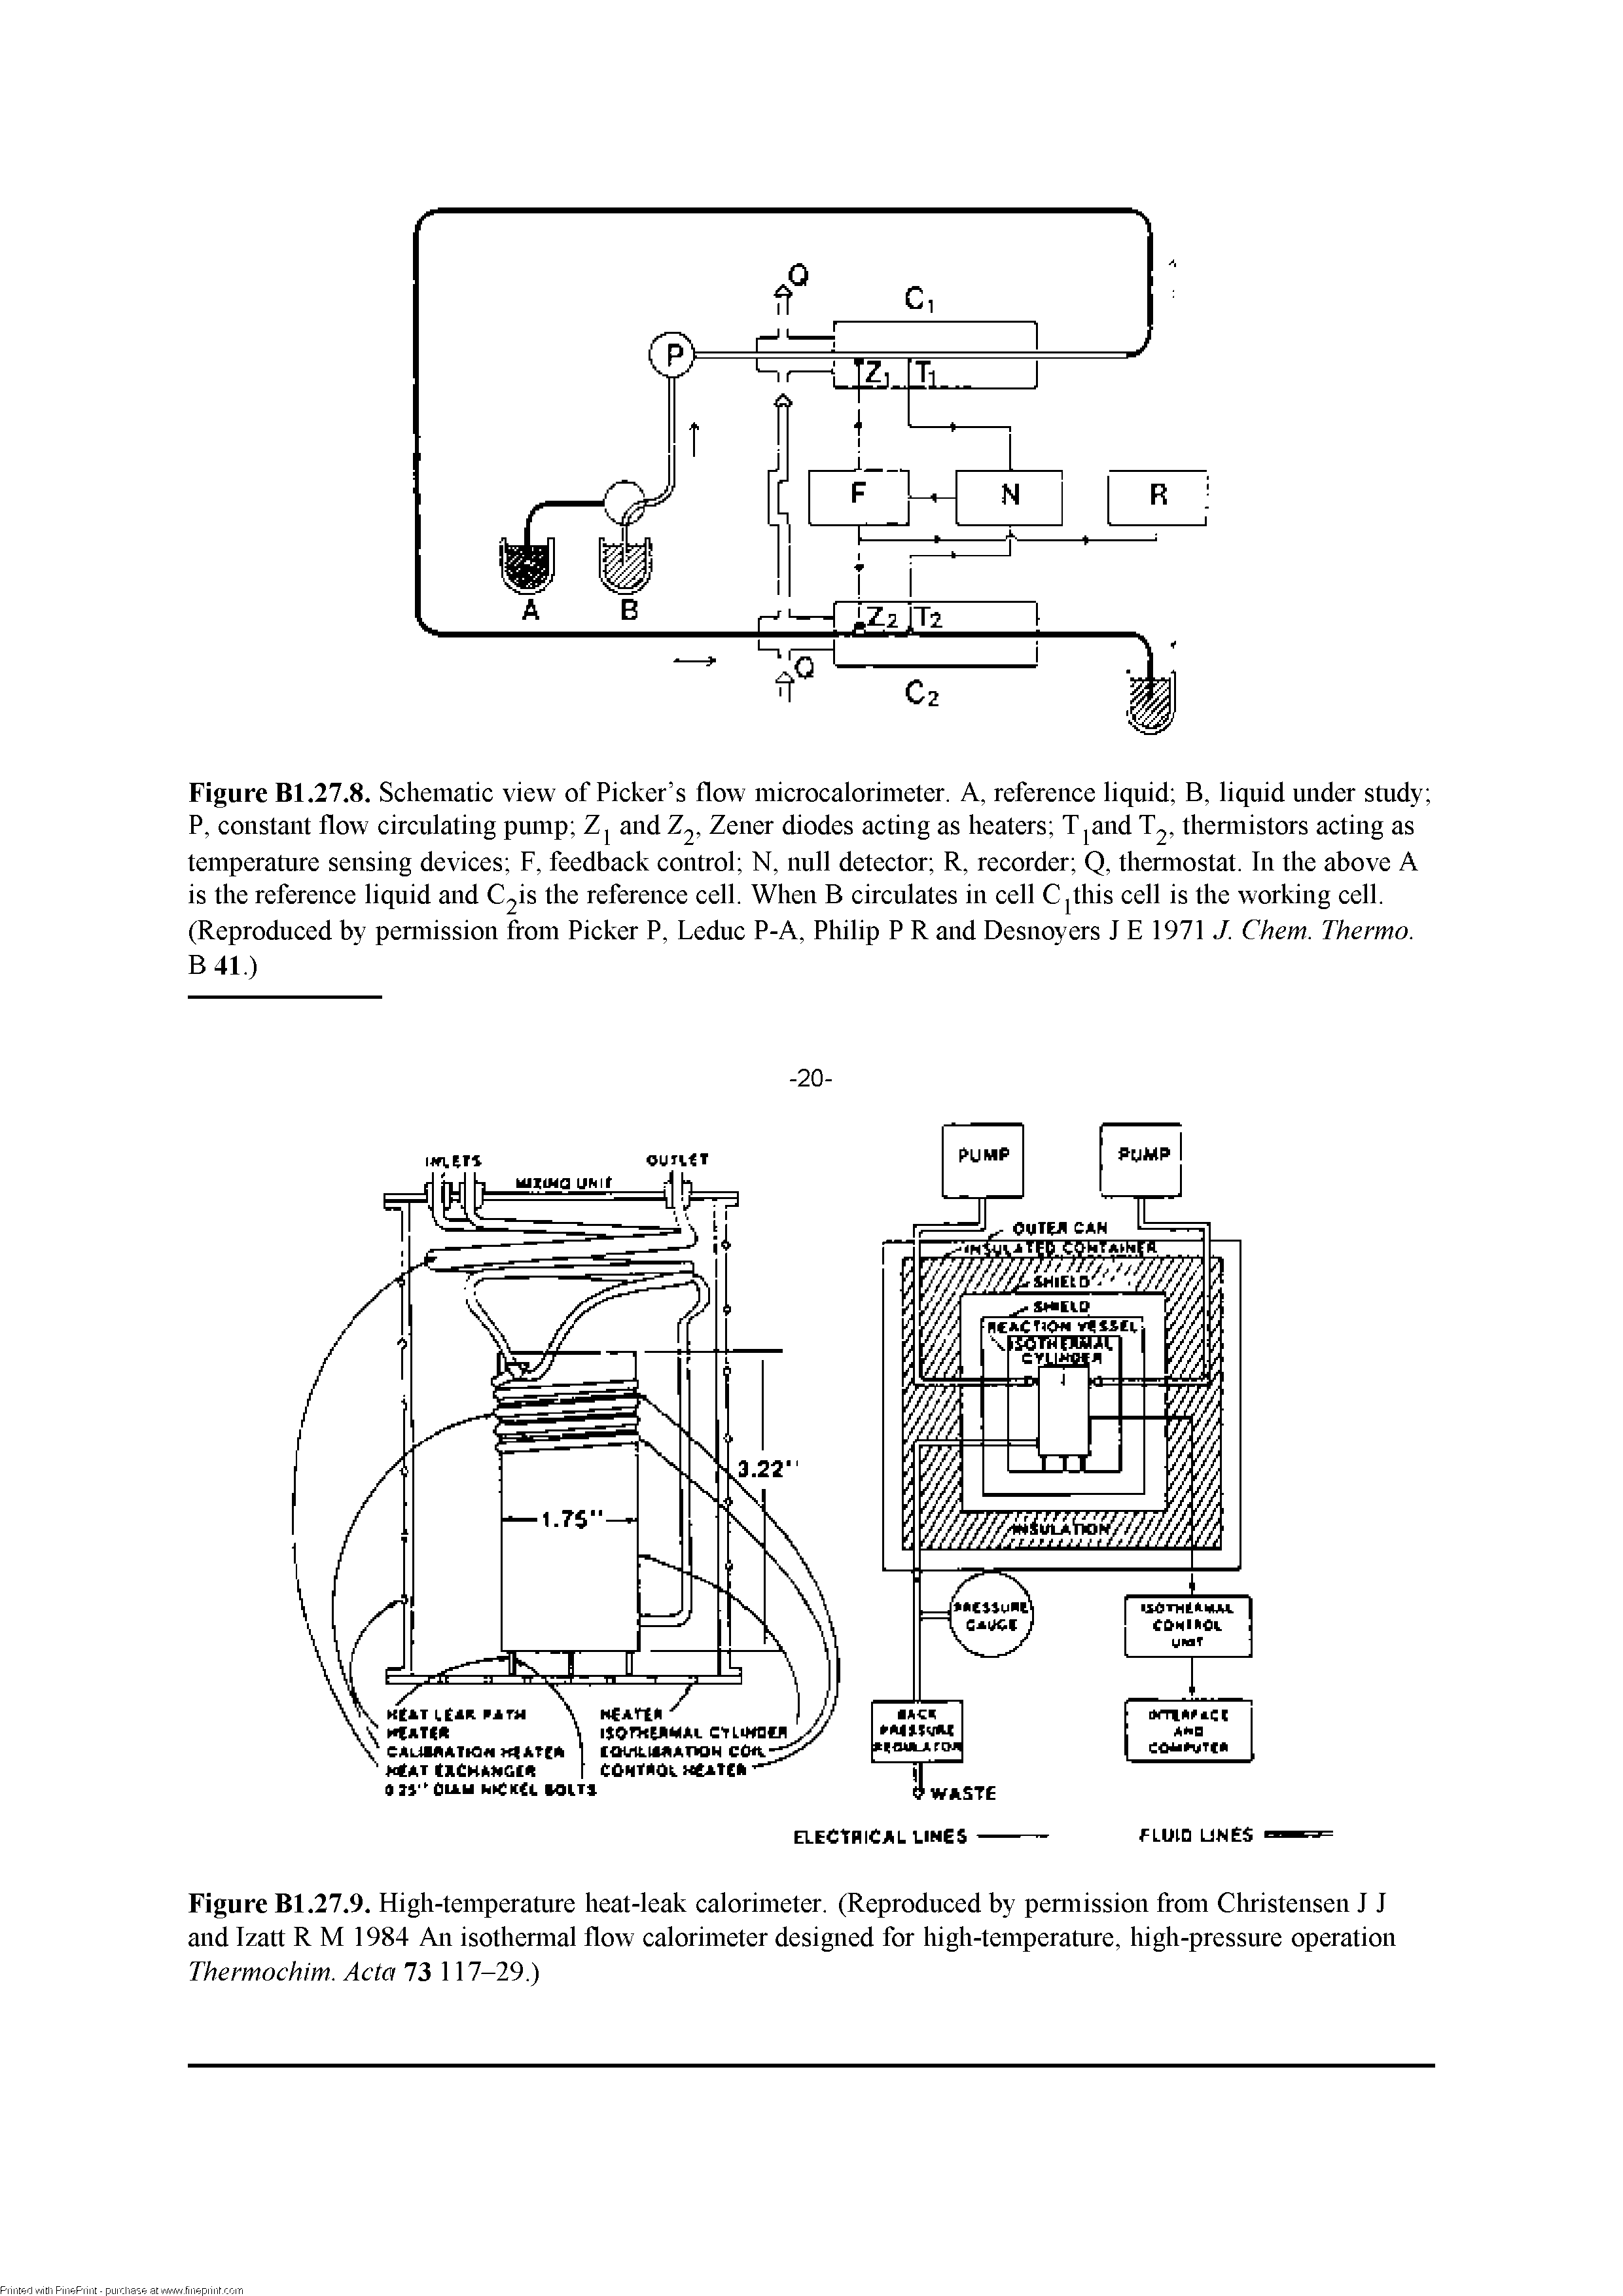 Figure Bl.27.8. Schematic view of Picker s flow microcalorimeter. A, reference liquid B, liquid under study P, constant flow circulating pump and 2, Zener diodes acting as heaters T and T2, thennistors acting as temperature sensing devices F, feedback control N, null detector R, recorder Q, themiostat. In the above A is the reference liquid and C2is the reference cell. When B circulates in cell C this cell is the working cell. (Reproduced by pemiission from Picker P, Leduc P-A, Philip P R and Desnoyers J E 1971 J. Chem. Thermo. B41.)...